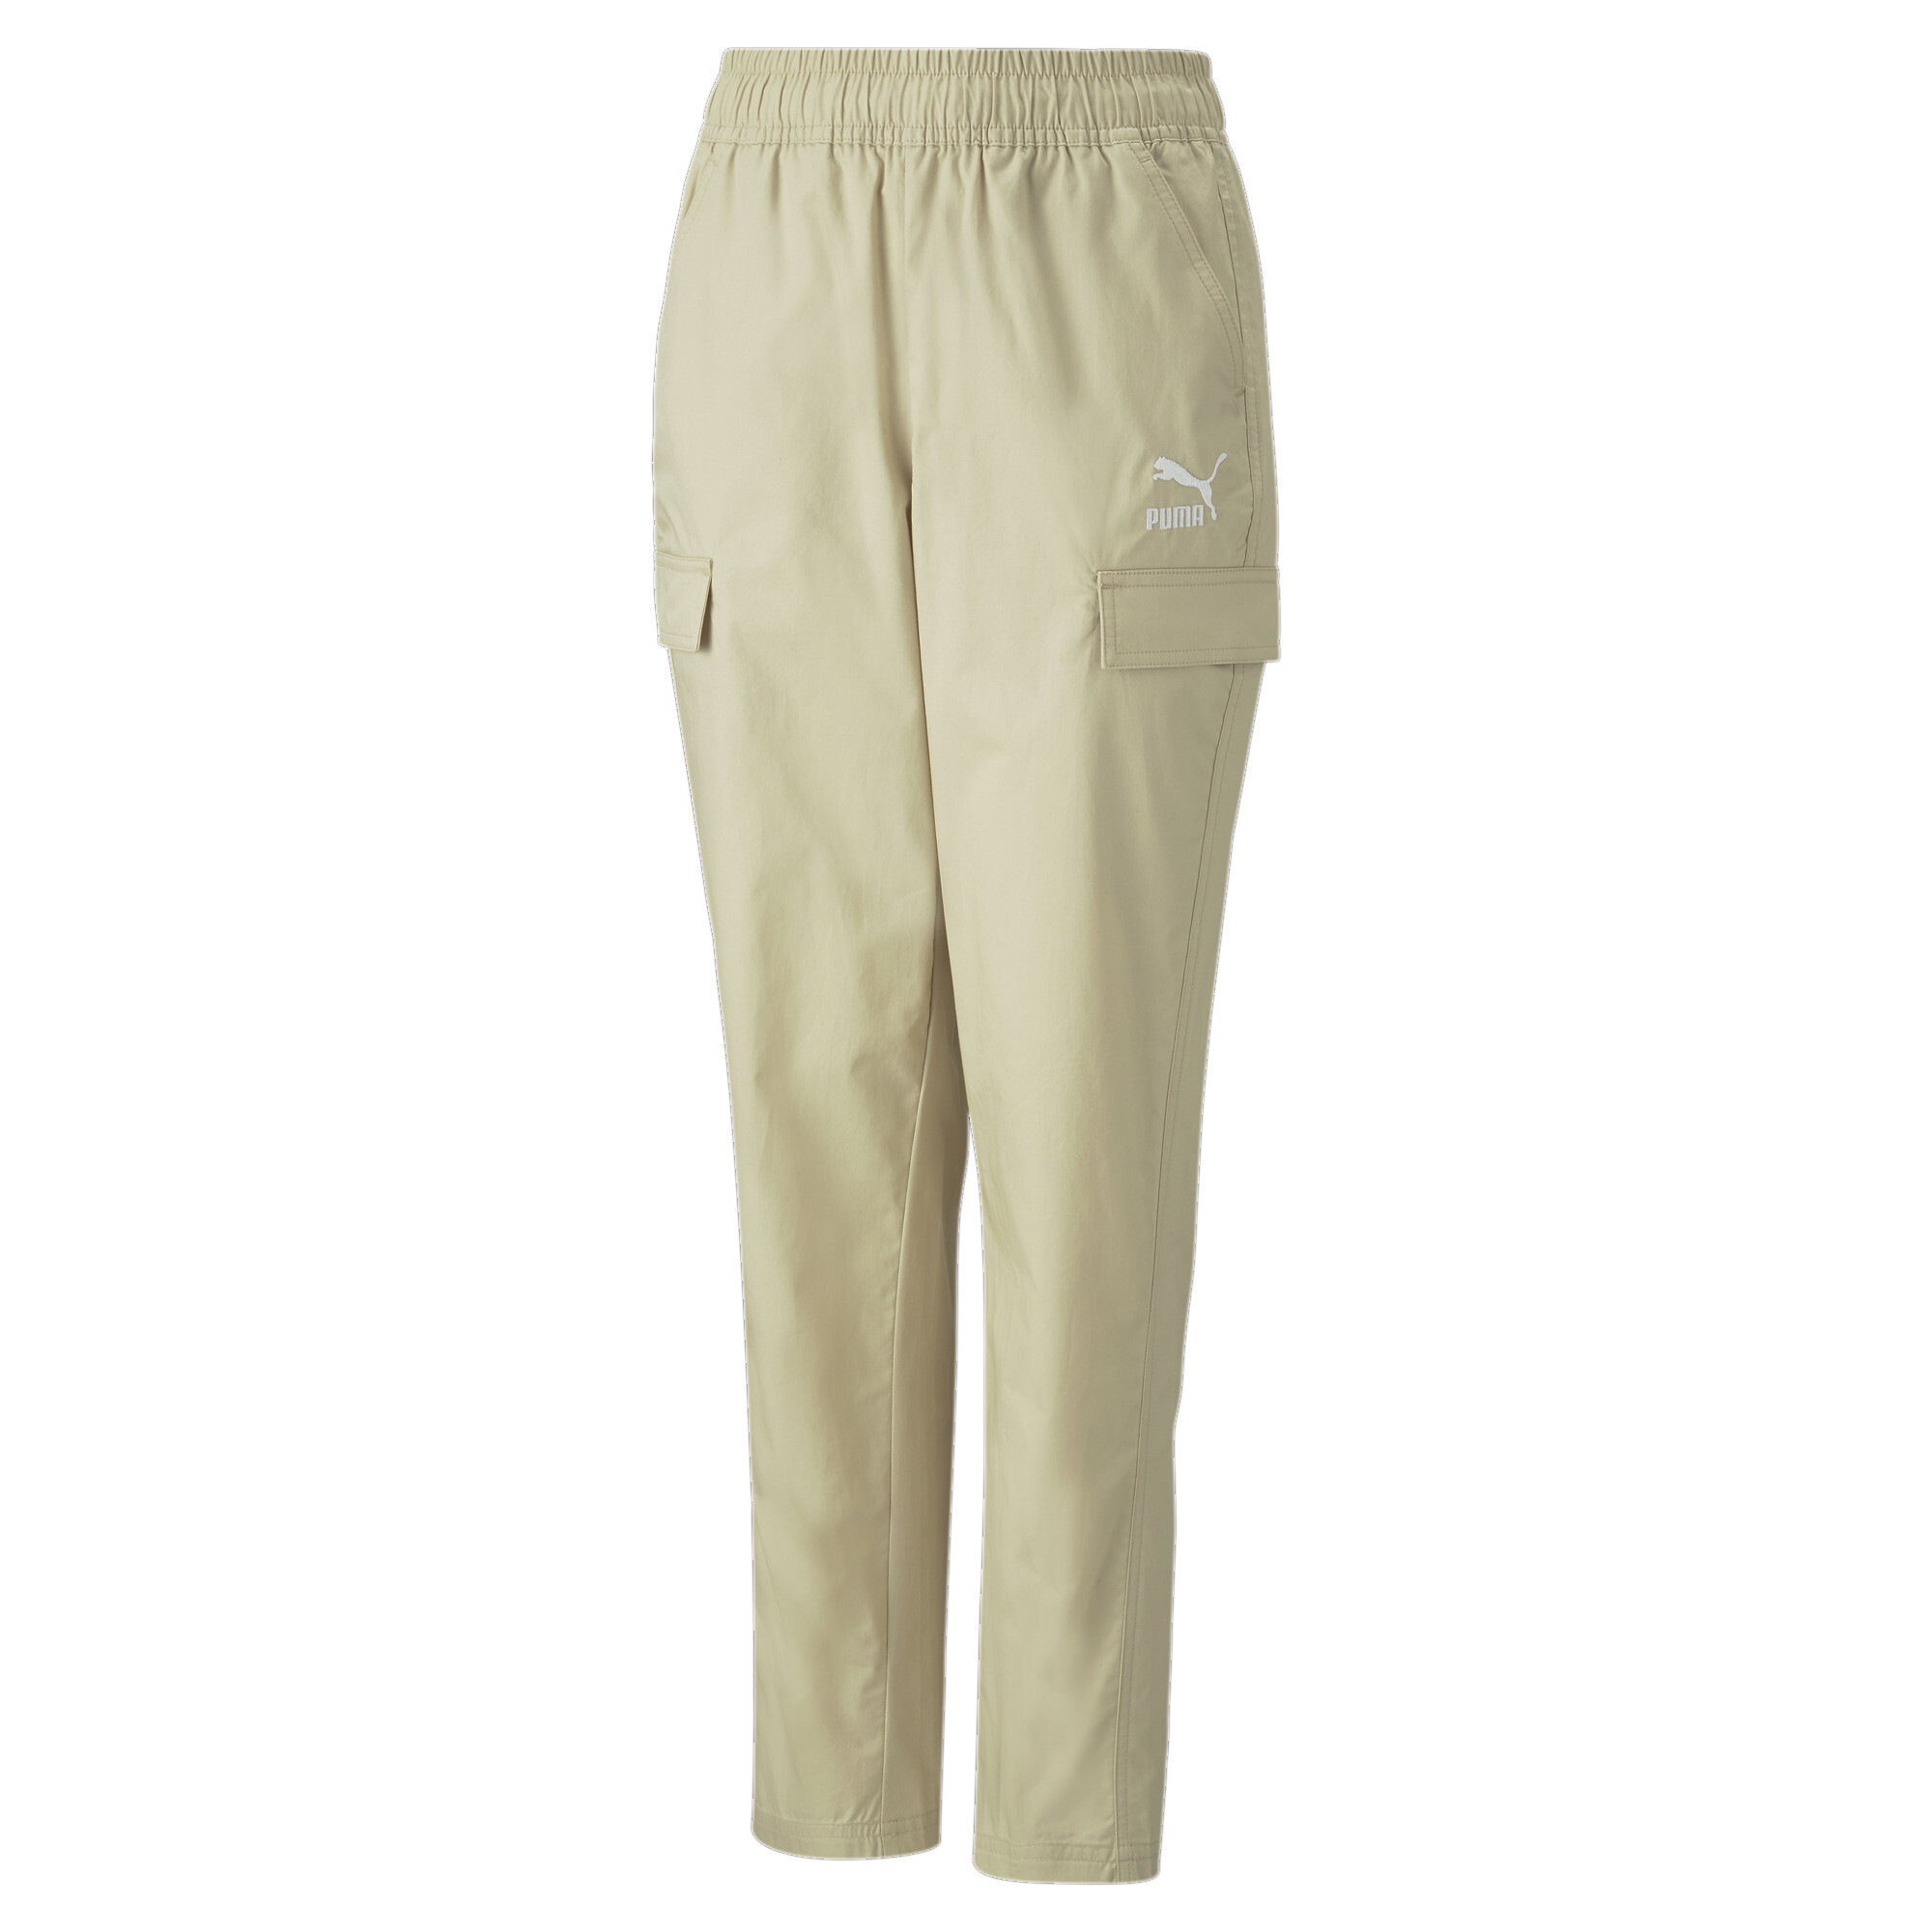 Puma Classics Woven Sweatpants Youth, Beige, Size 11-12Y, Clothing